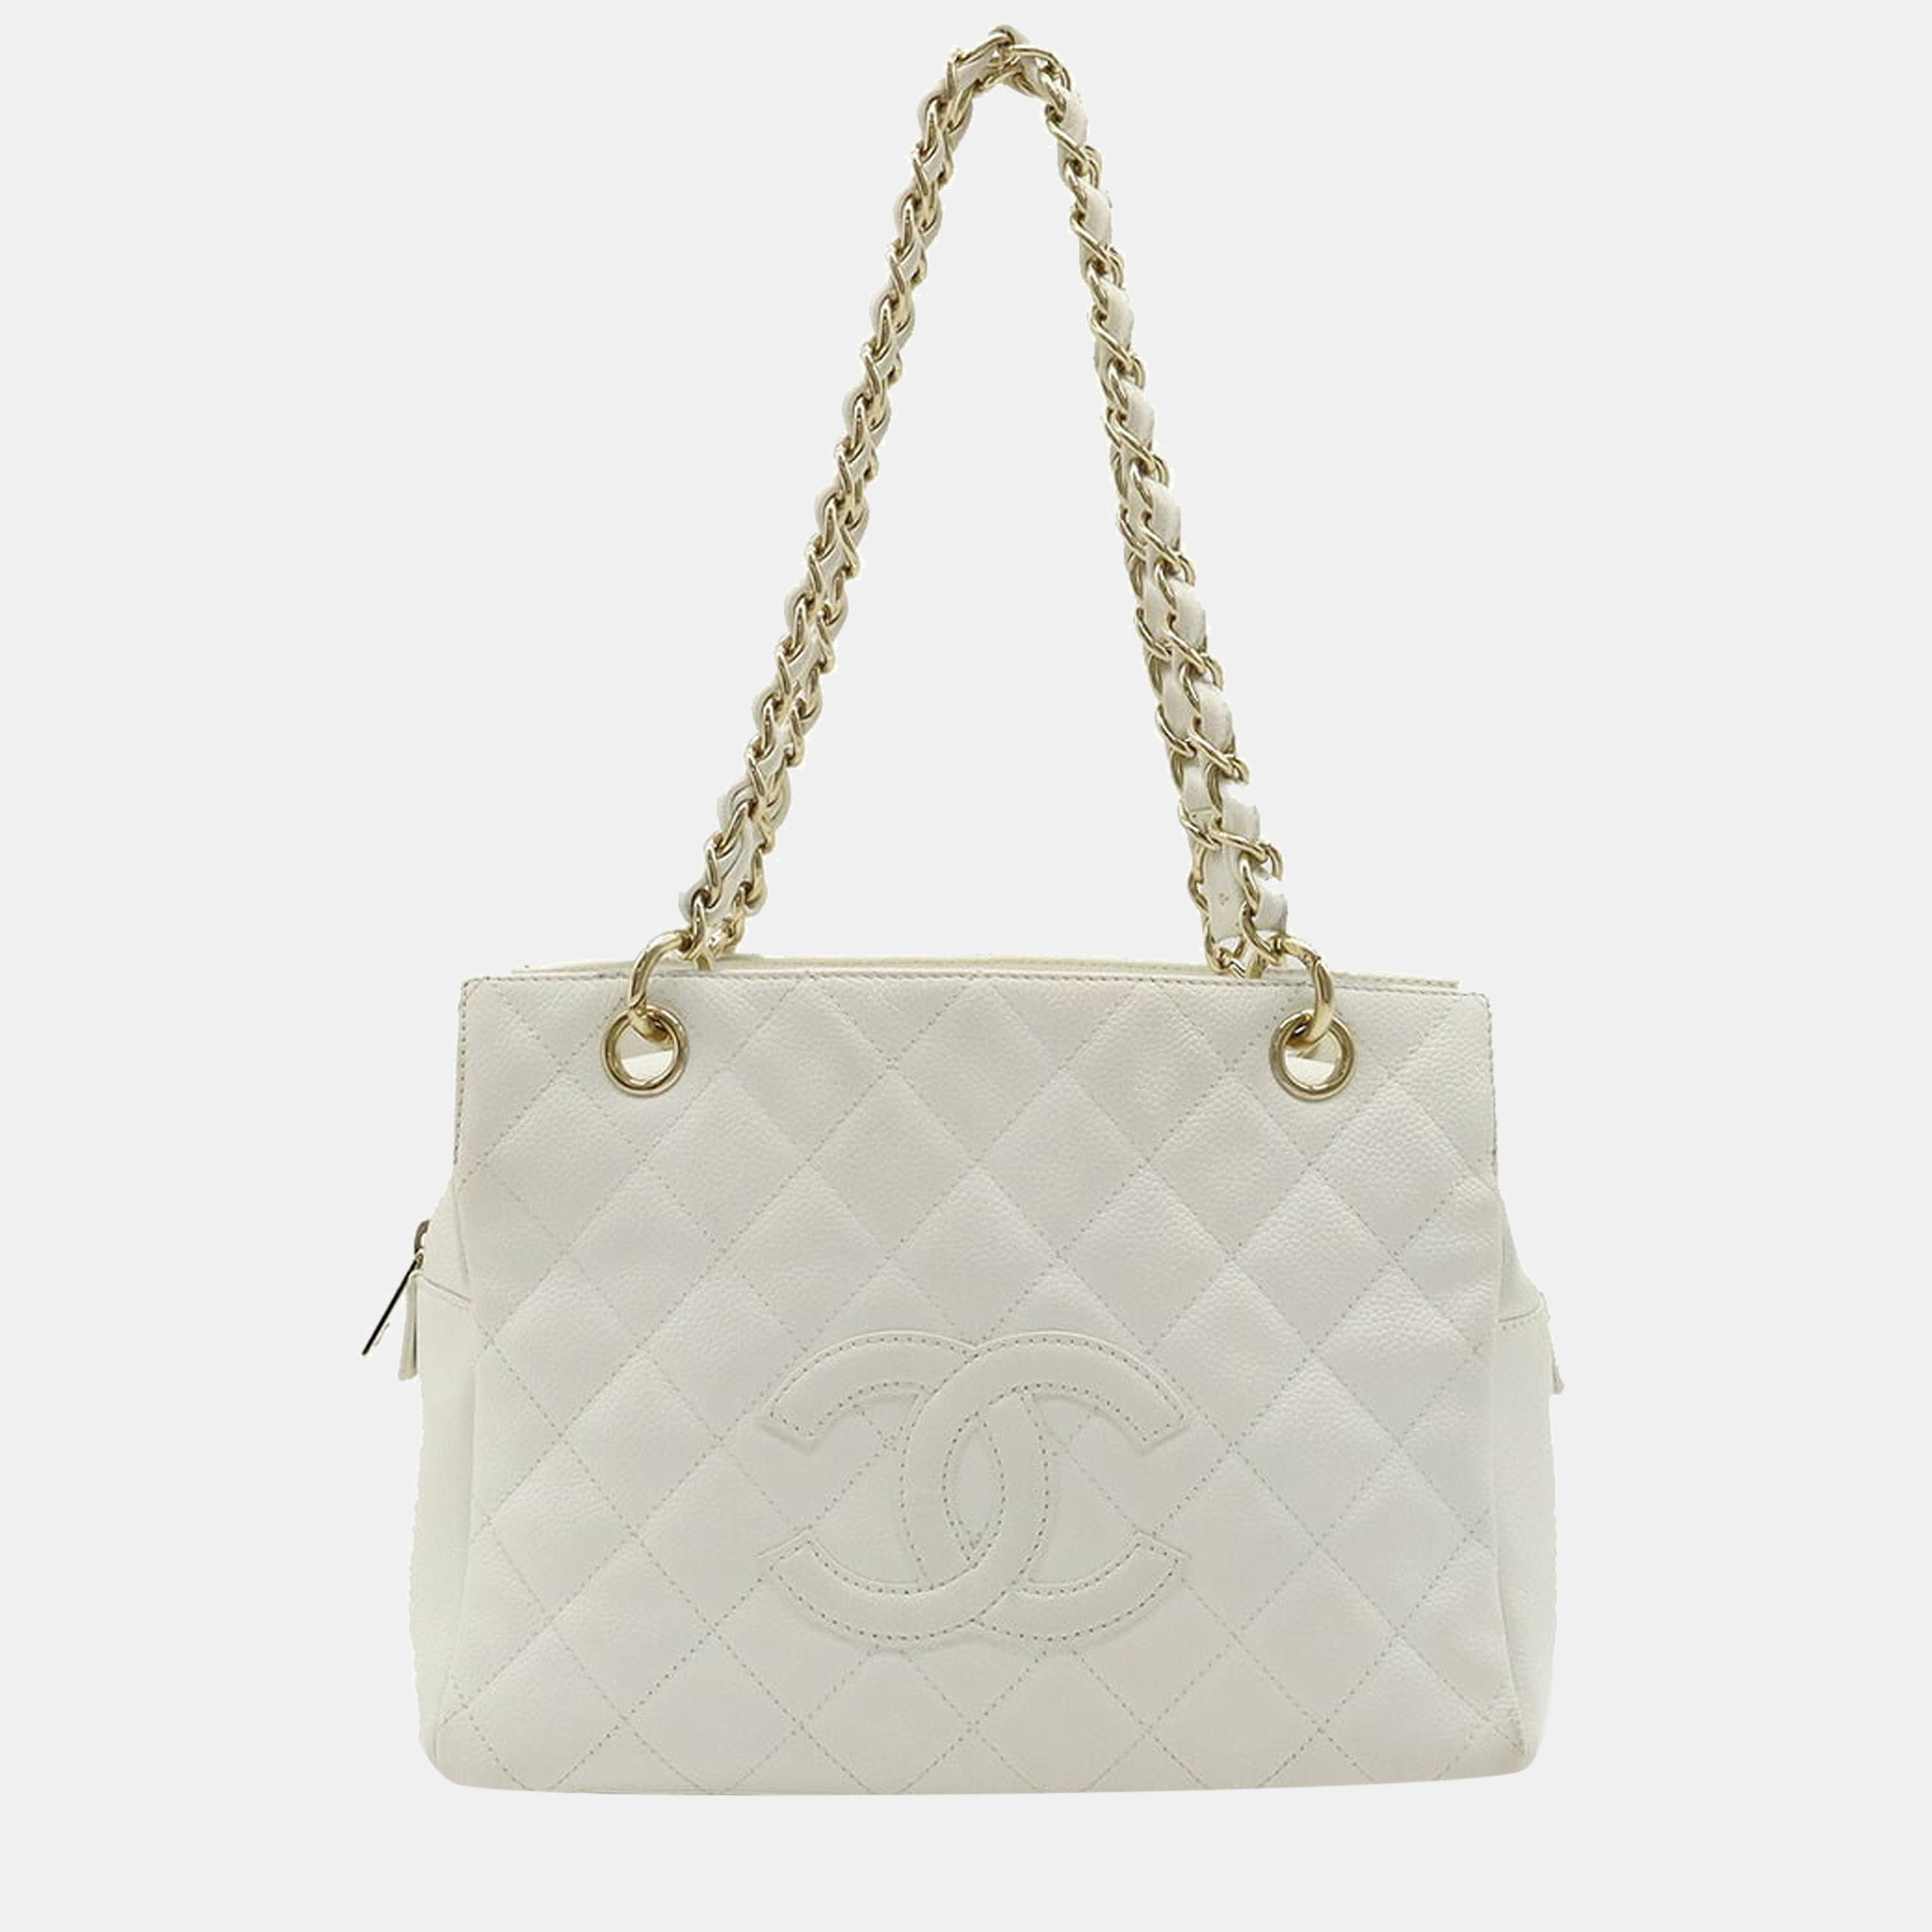 Pre-owned Chanel White Caviar Leather Petit Cc Timeless Tote Bag